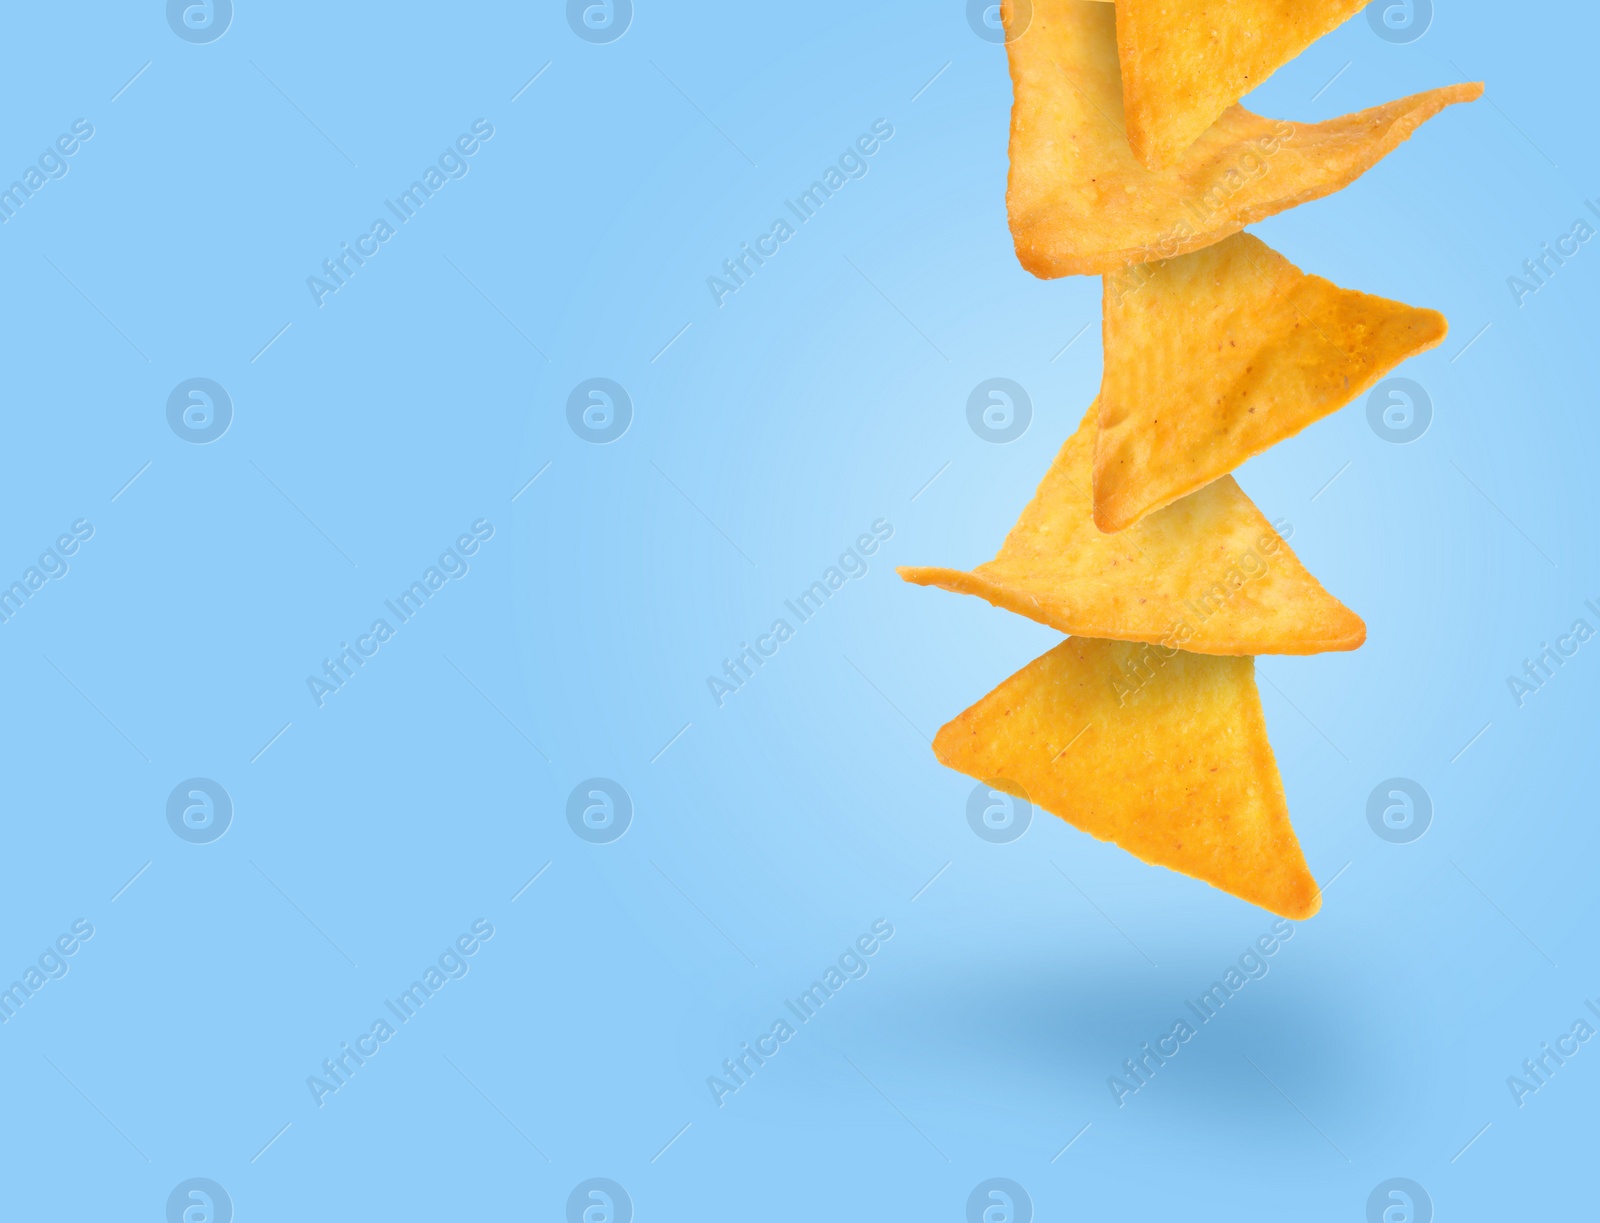 Image of Tasty tortilla chips falling on light blue background, space for text